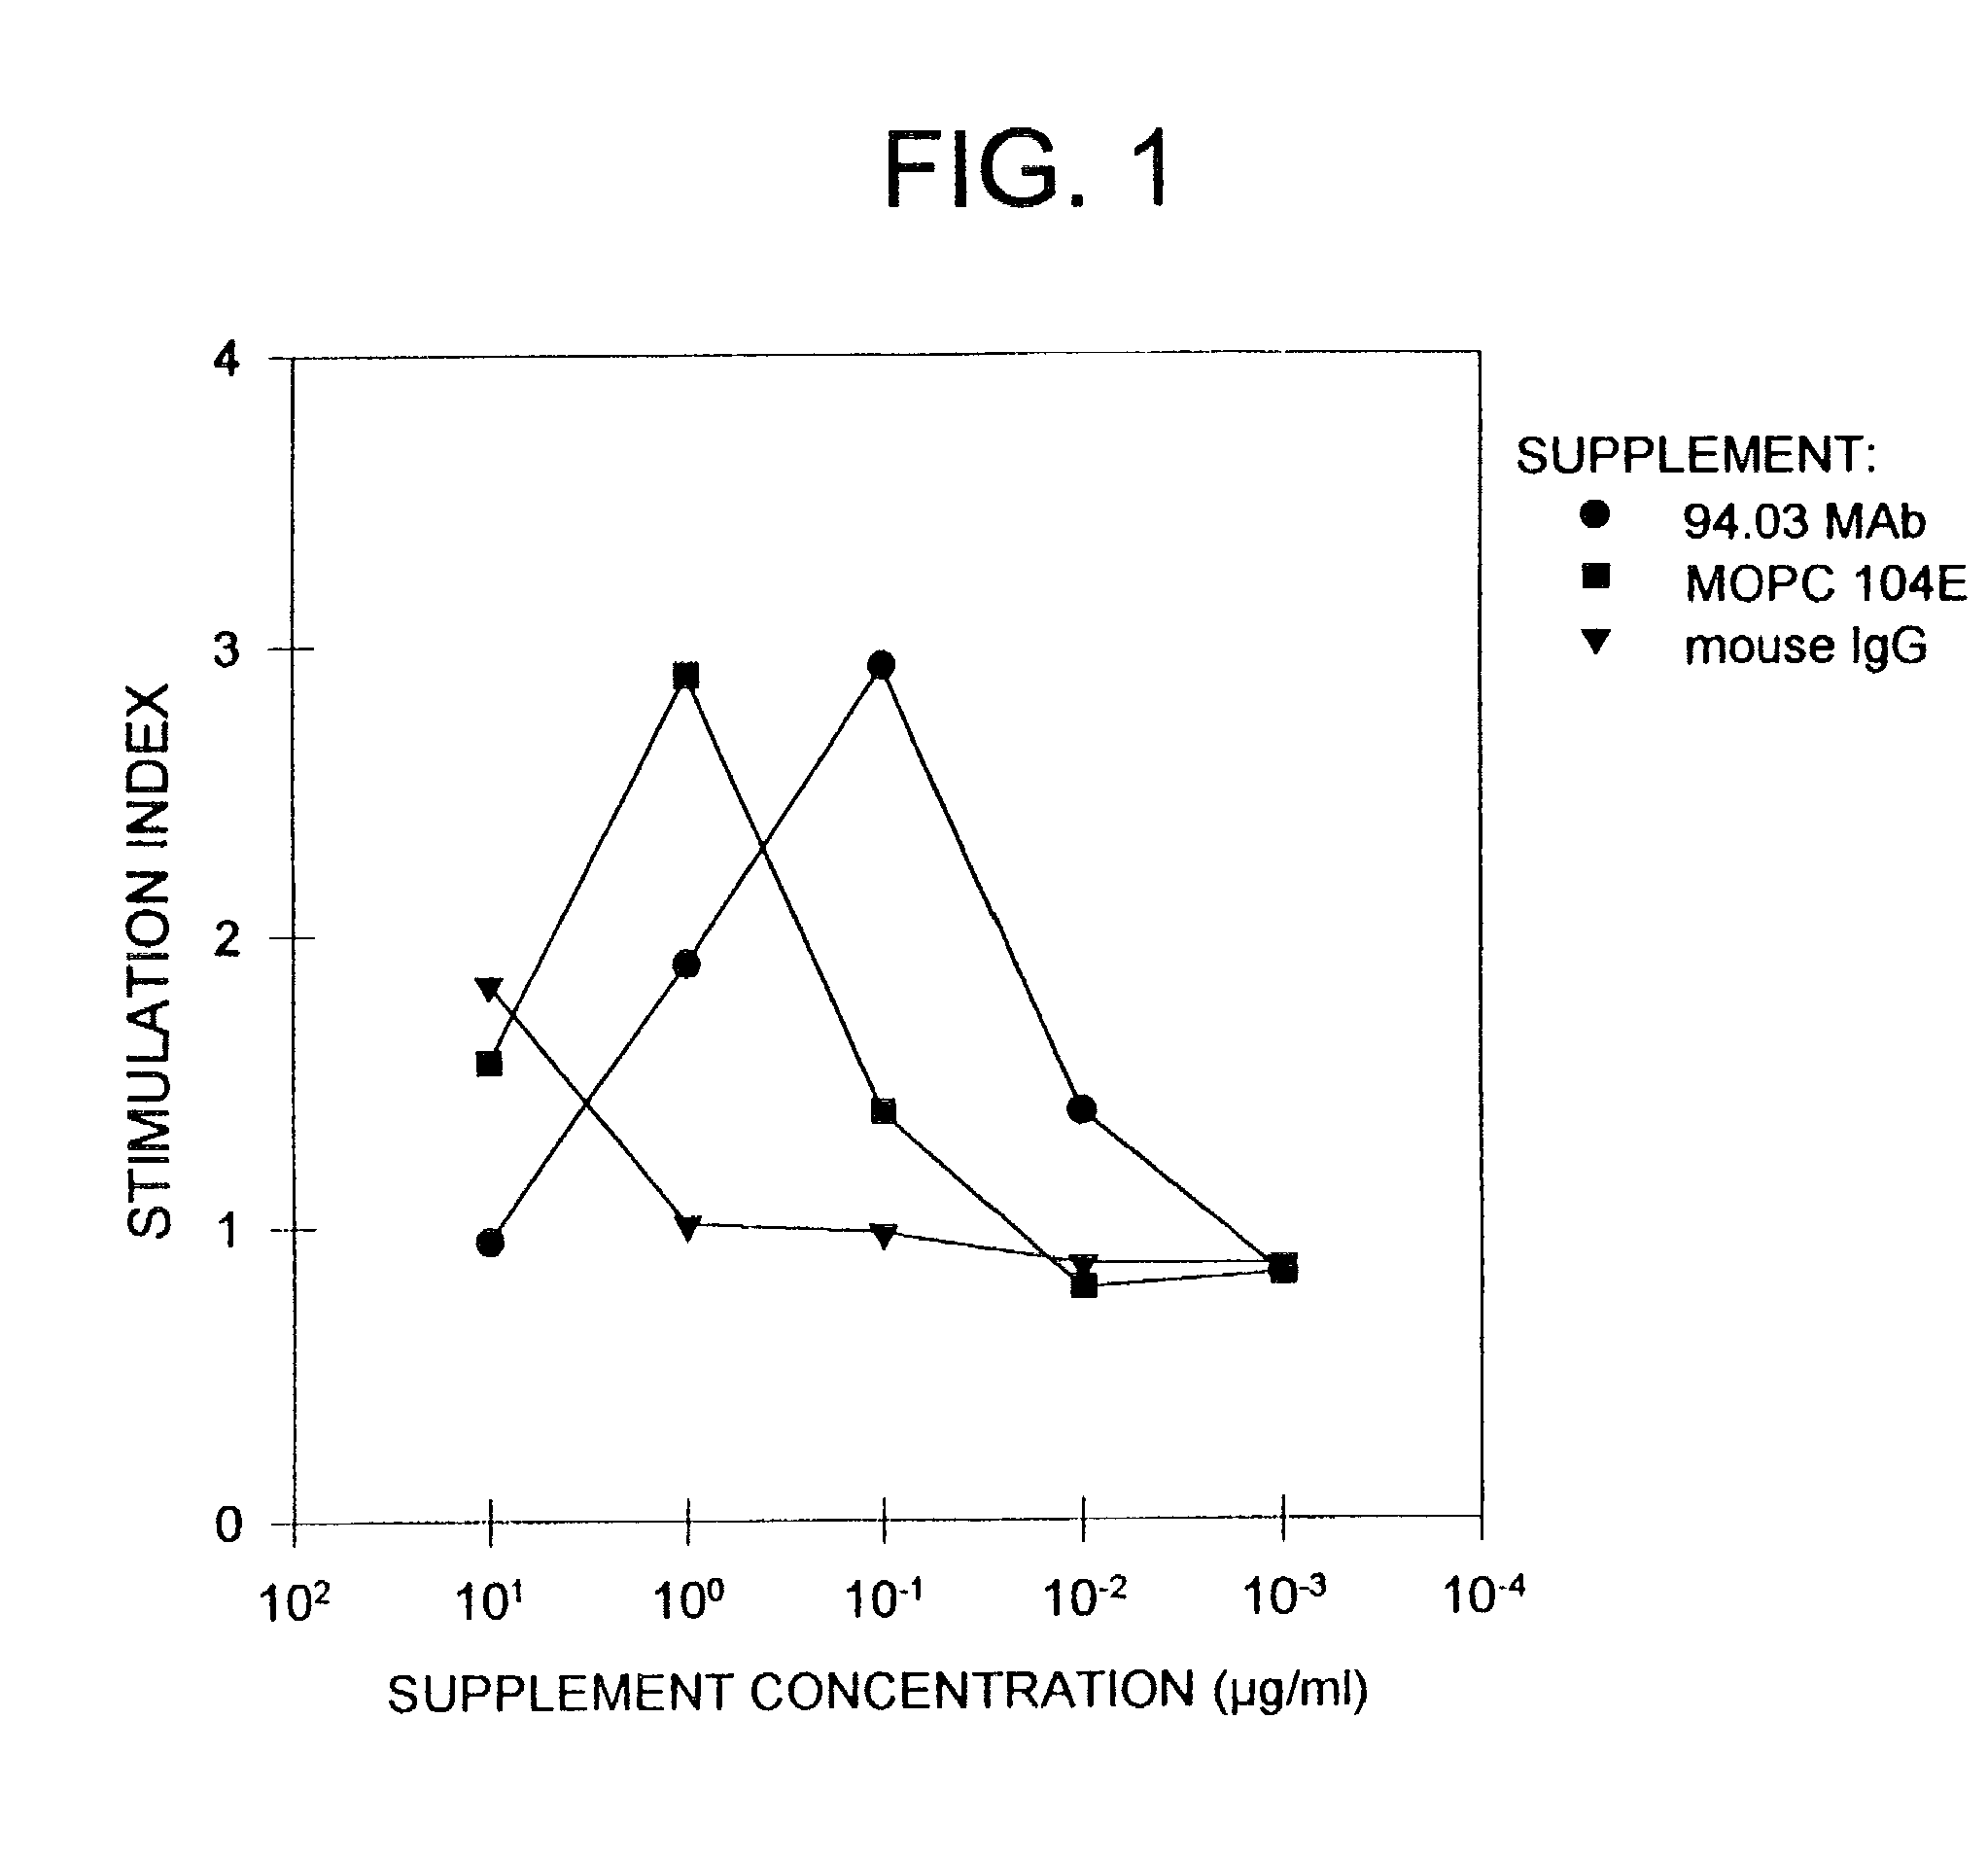 Human IgM antibodies, and diagnostic and therapeutic uses thereof particularly in the central nervous system